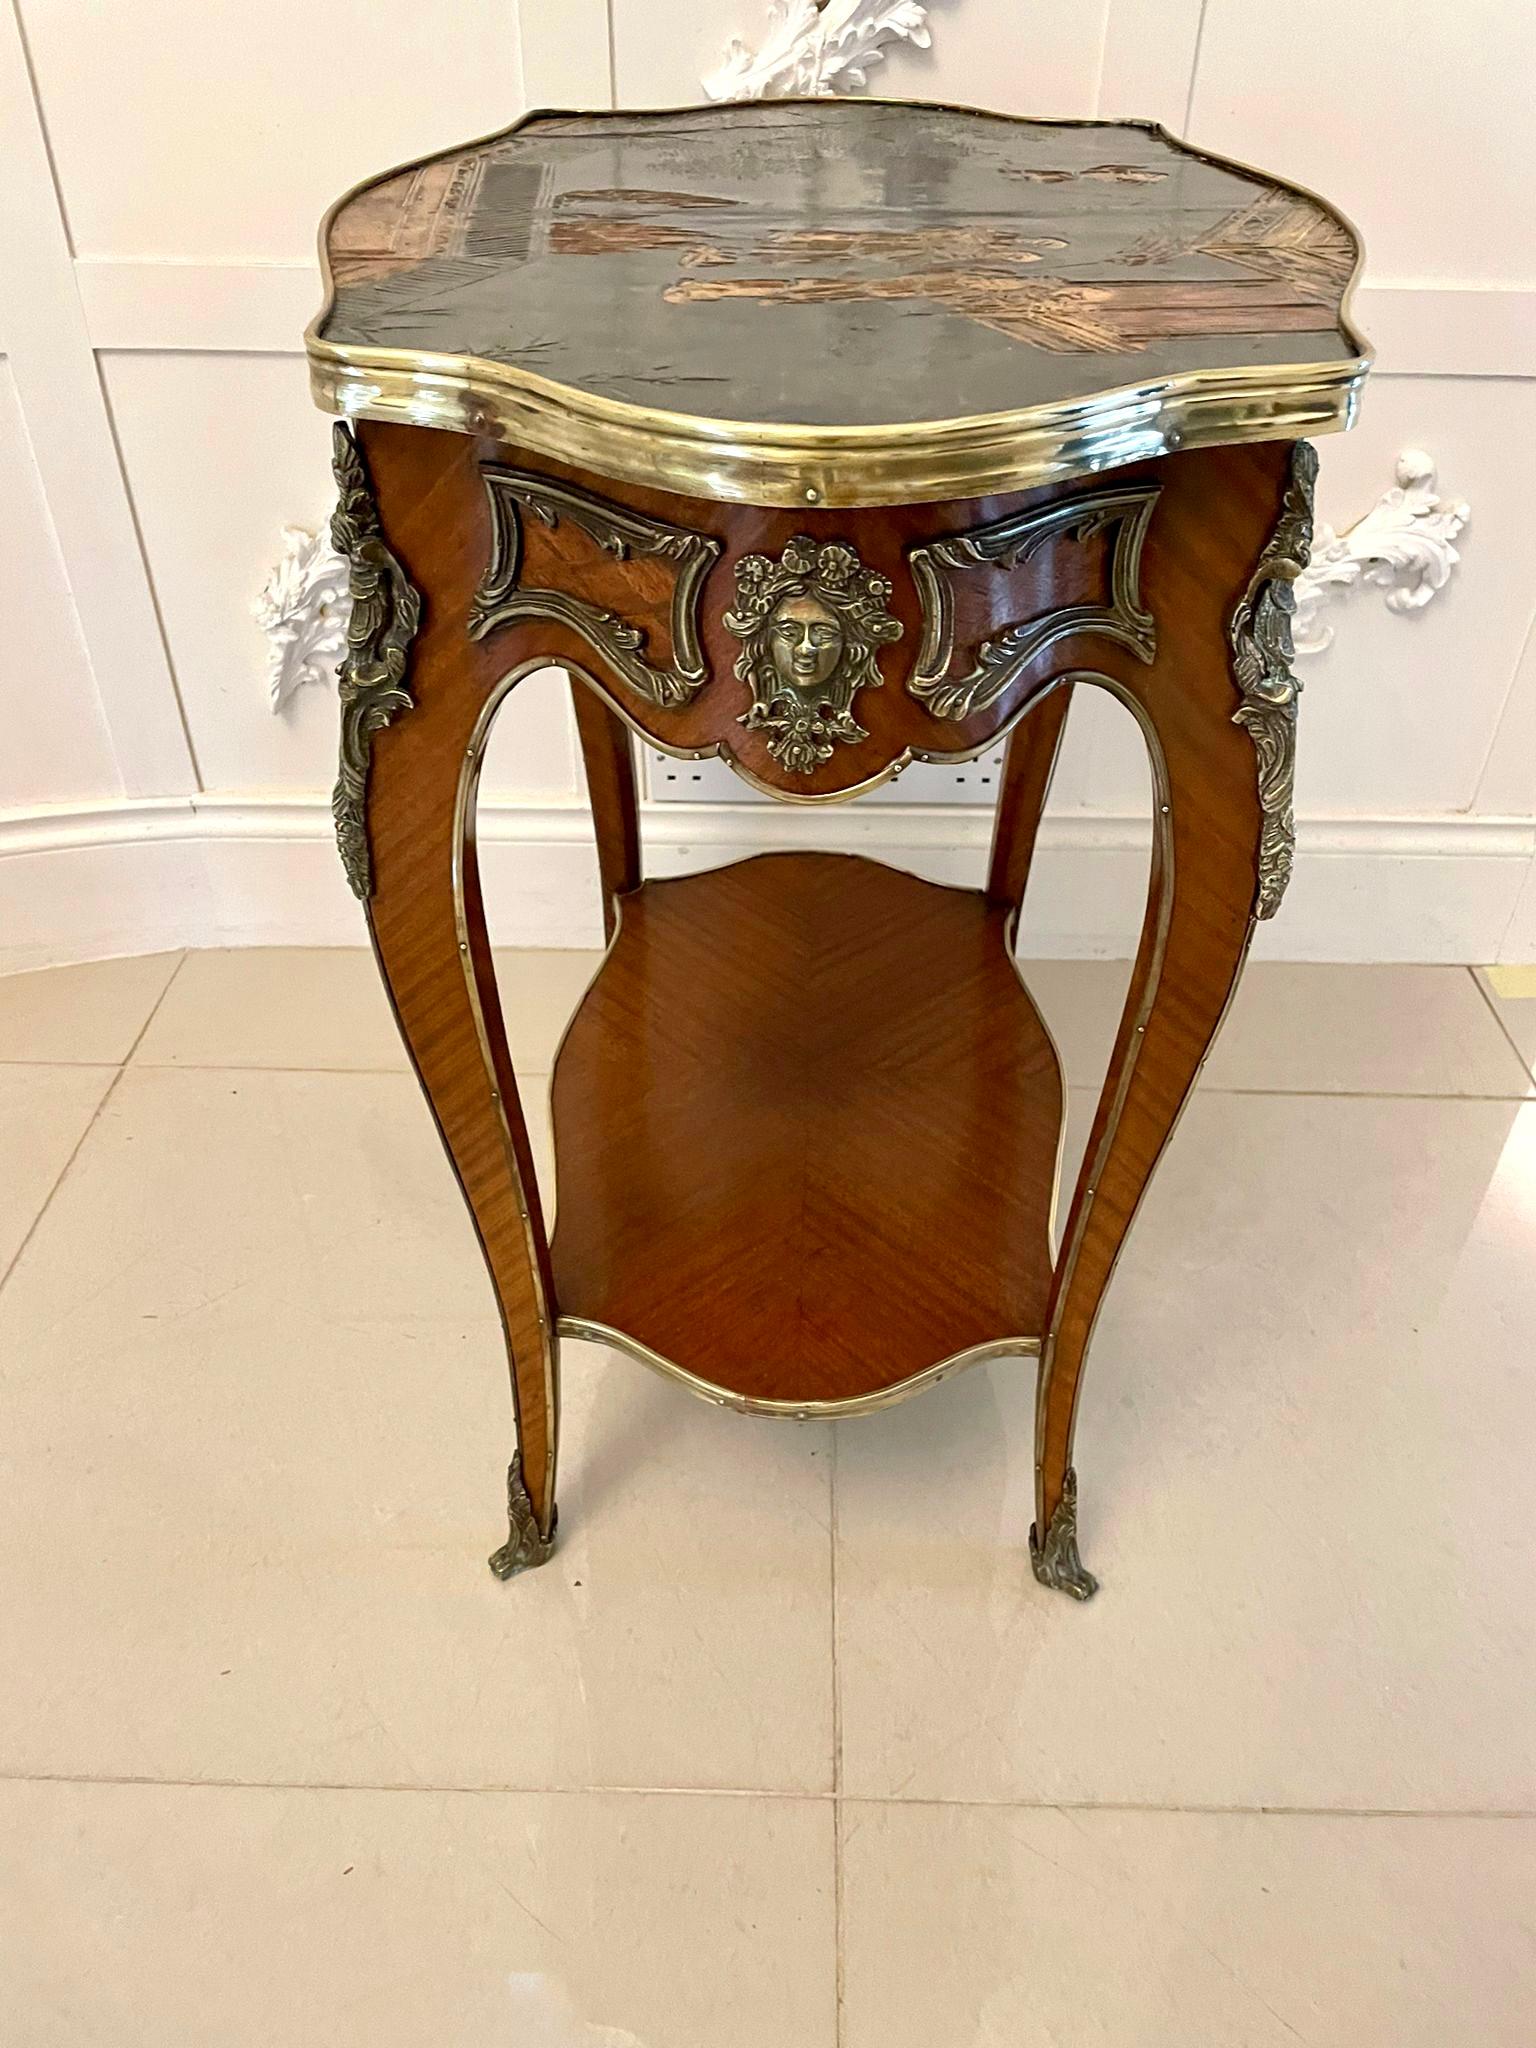 Outstanding Antique French Kingwood and Ormolu Mounted Freestanding Centre Table For Sale 1